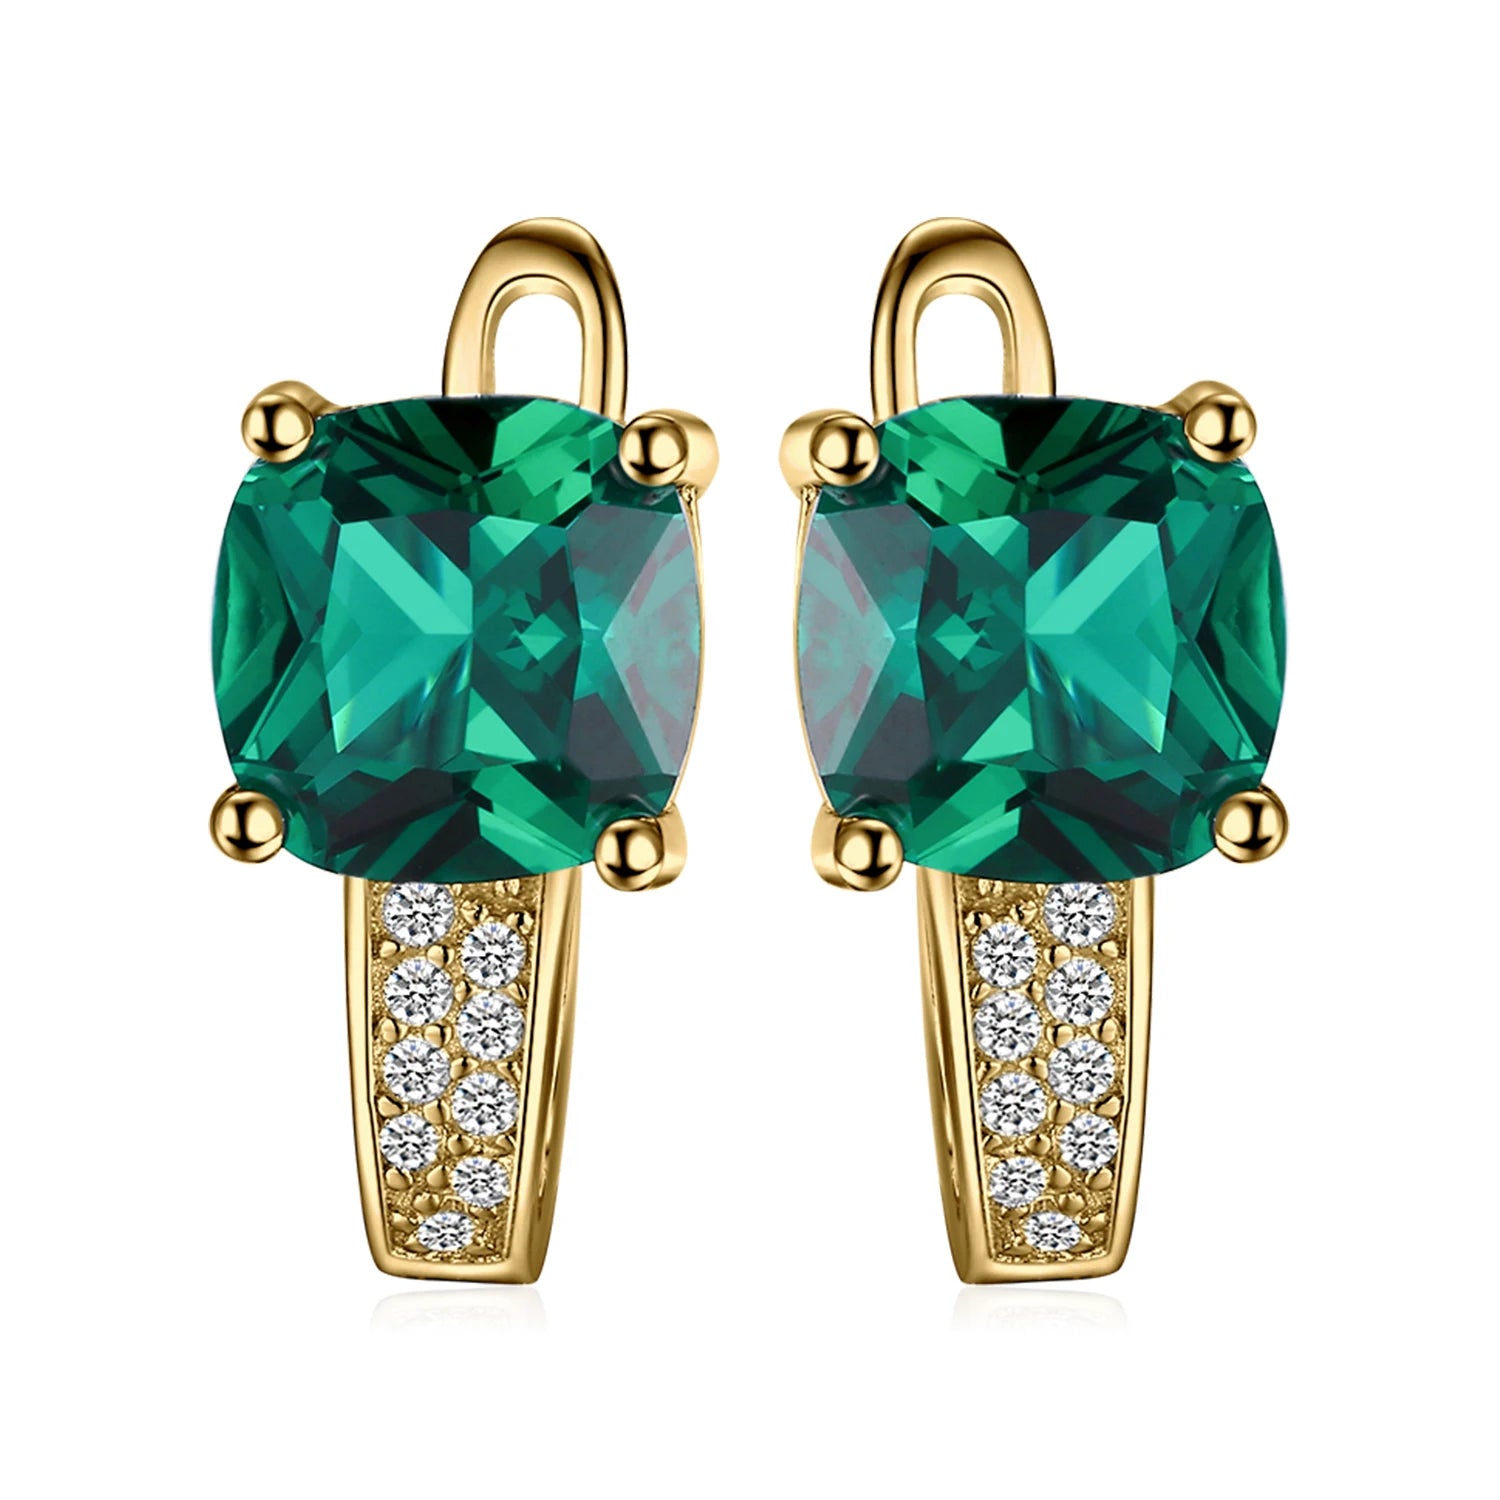 JewelryPalace Cushion Cut Simulated Emerald 925 Sterling Silver Fashion Clip Earrings for Woman Yellow Gold Rose Gold Plated Yellow Gold Plated